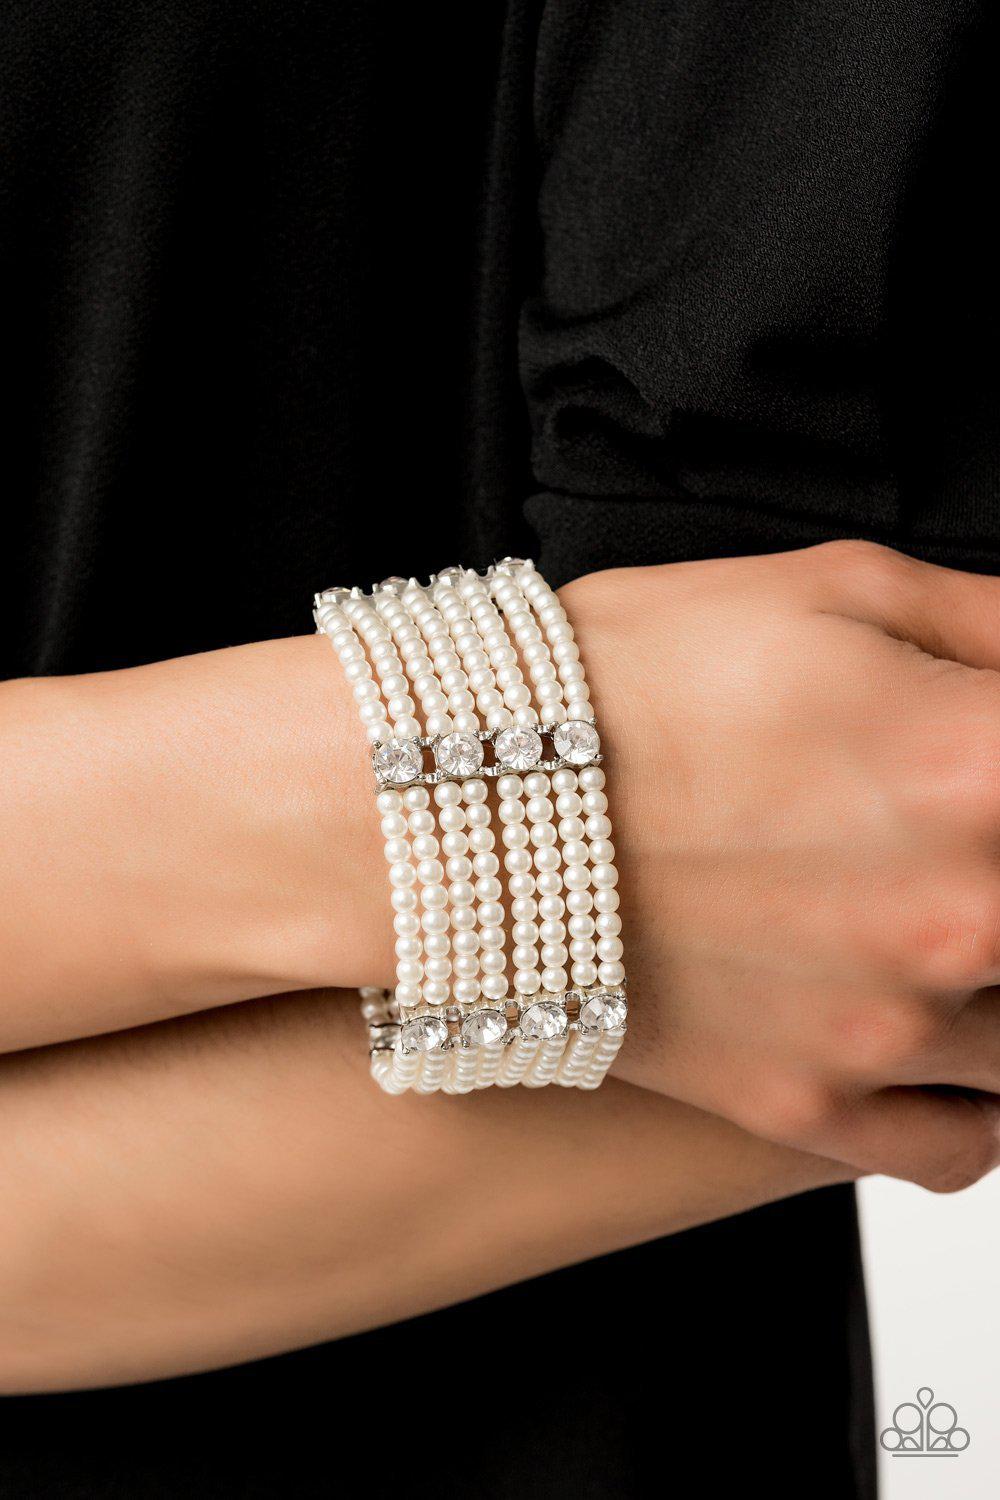 Get In Line White Pearl and Rhinestone Bracelet - Paparazzi Accessories-CarasShop.com - $5 Jewelry by Cara Jewels